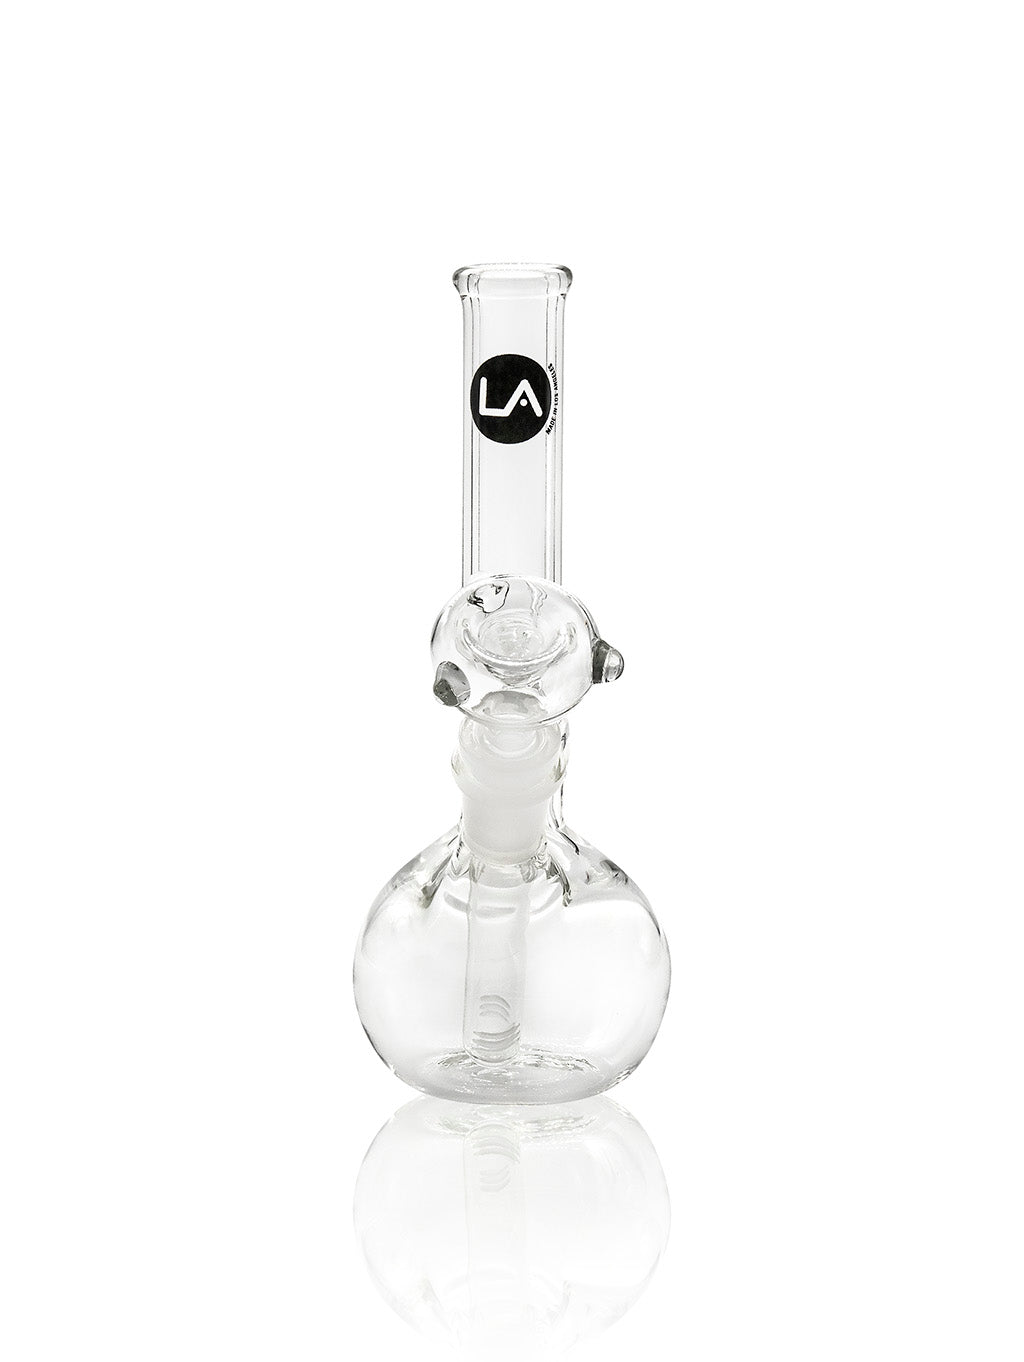 LA Pipes "The Zong" Compact Zong Style Bong with 45 Degree Joint, Front View on White Background